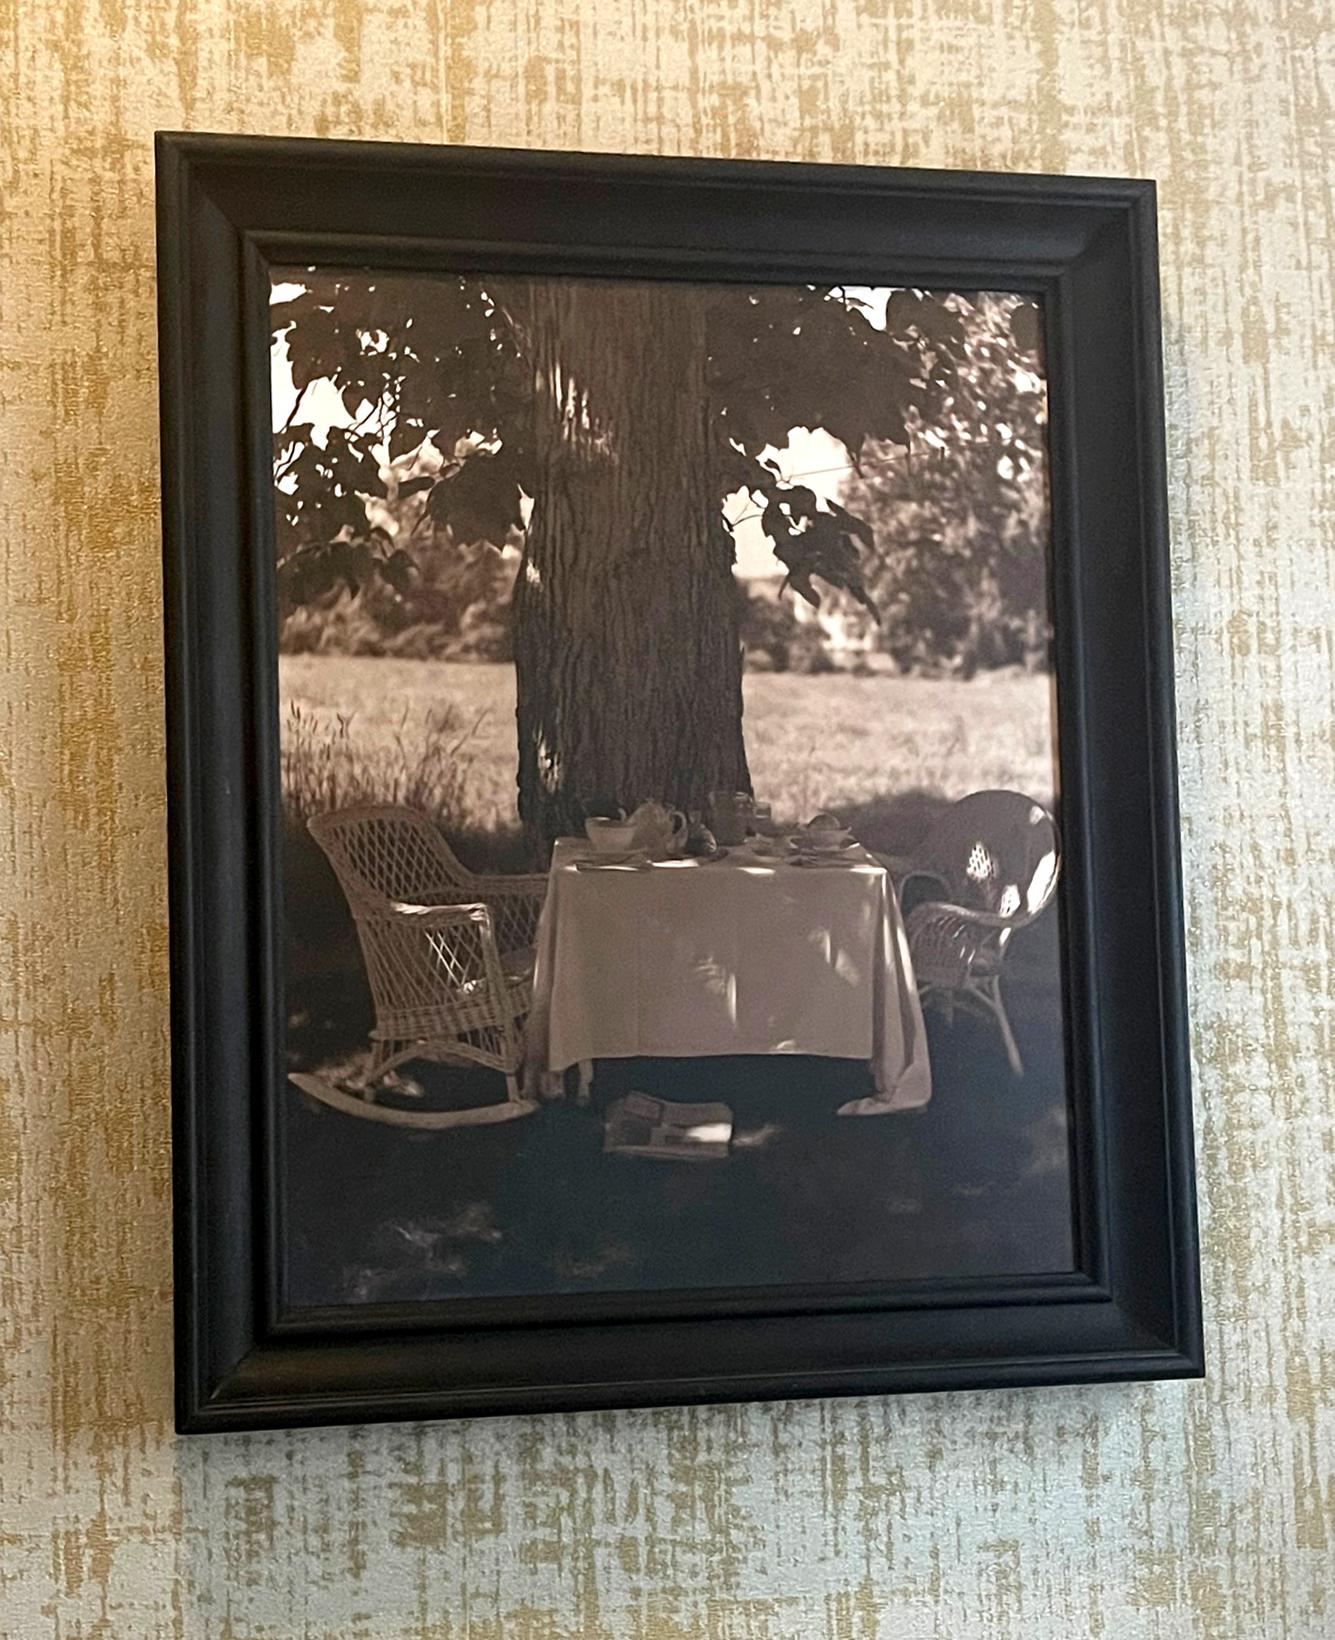 A framed photograph by John Patrick Dugdale (American, born 1960-) titled 